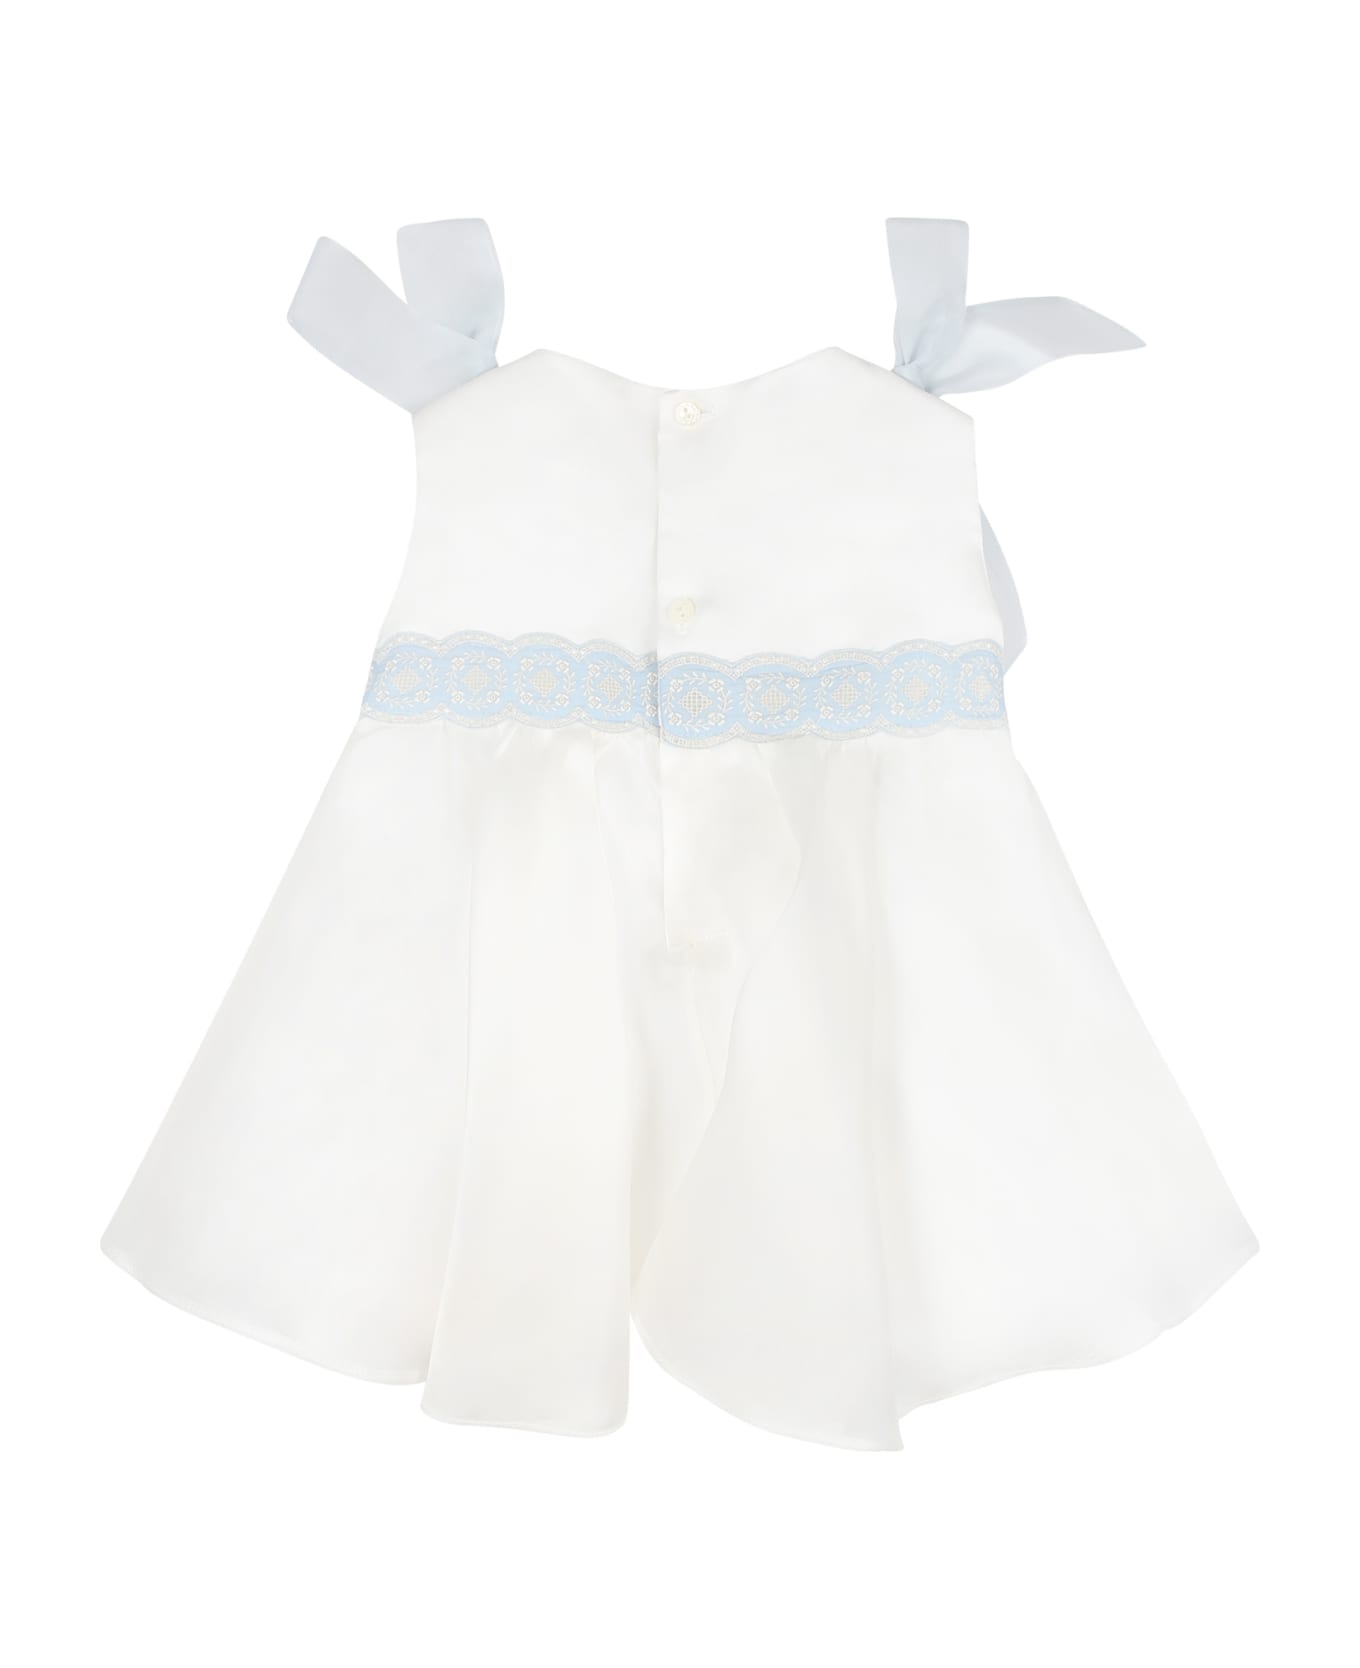 La stupenderia White Dress For Baby Girl With Light Blue Embroidery - White